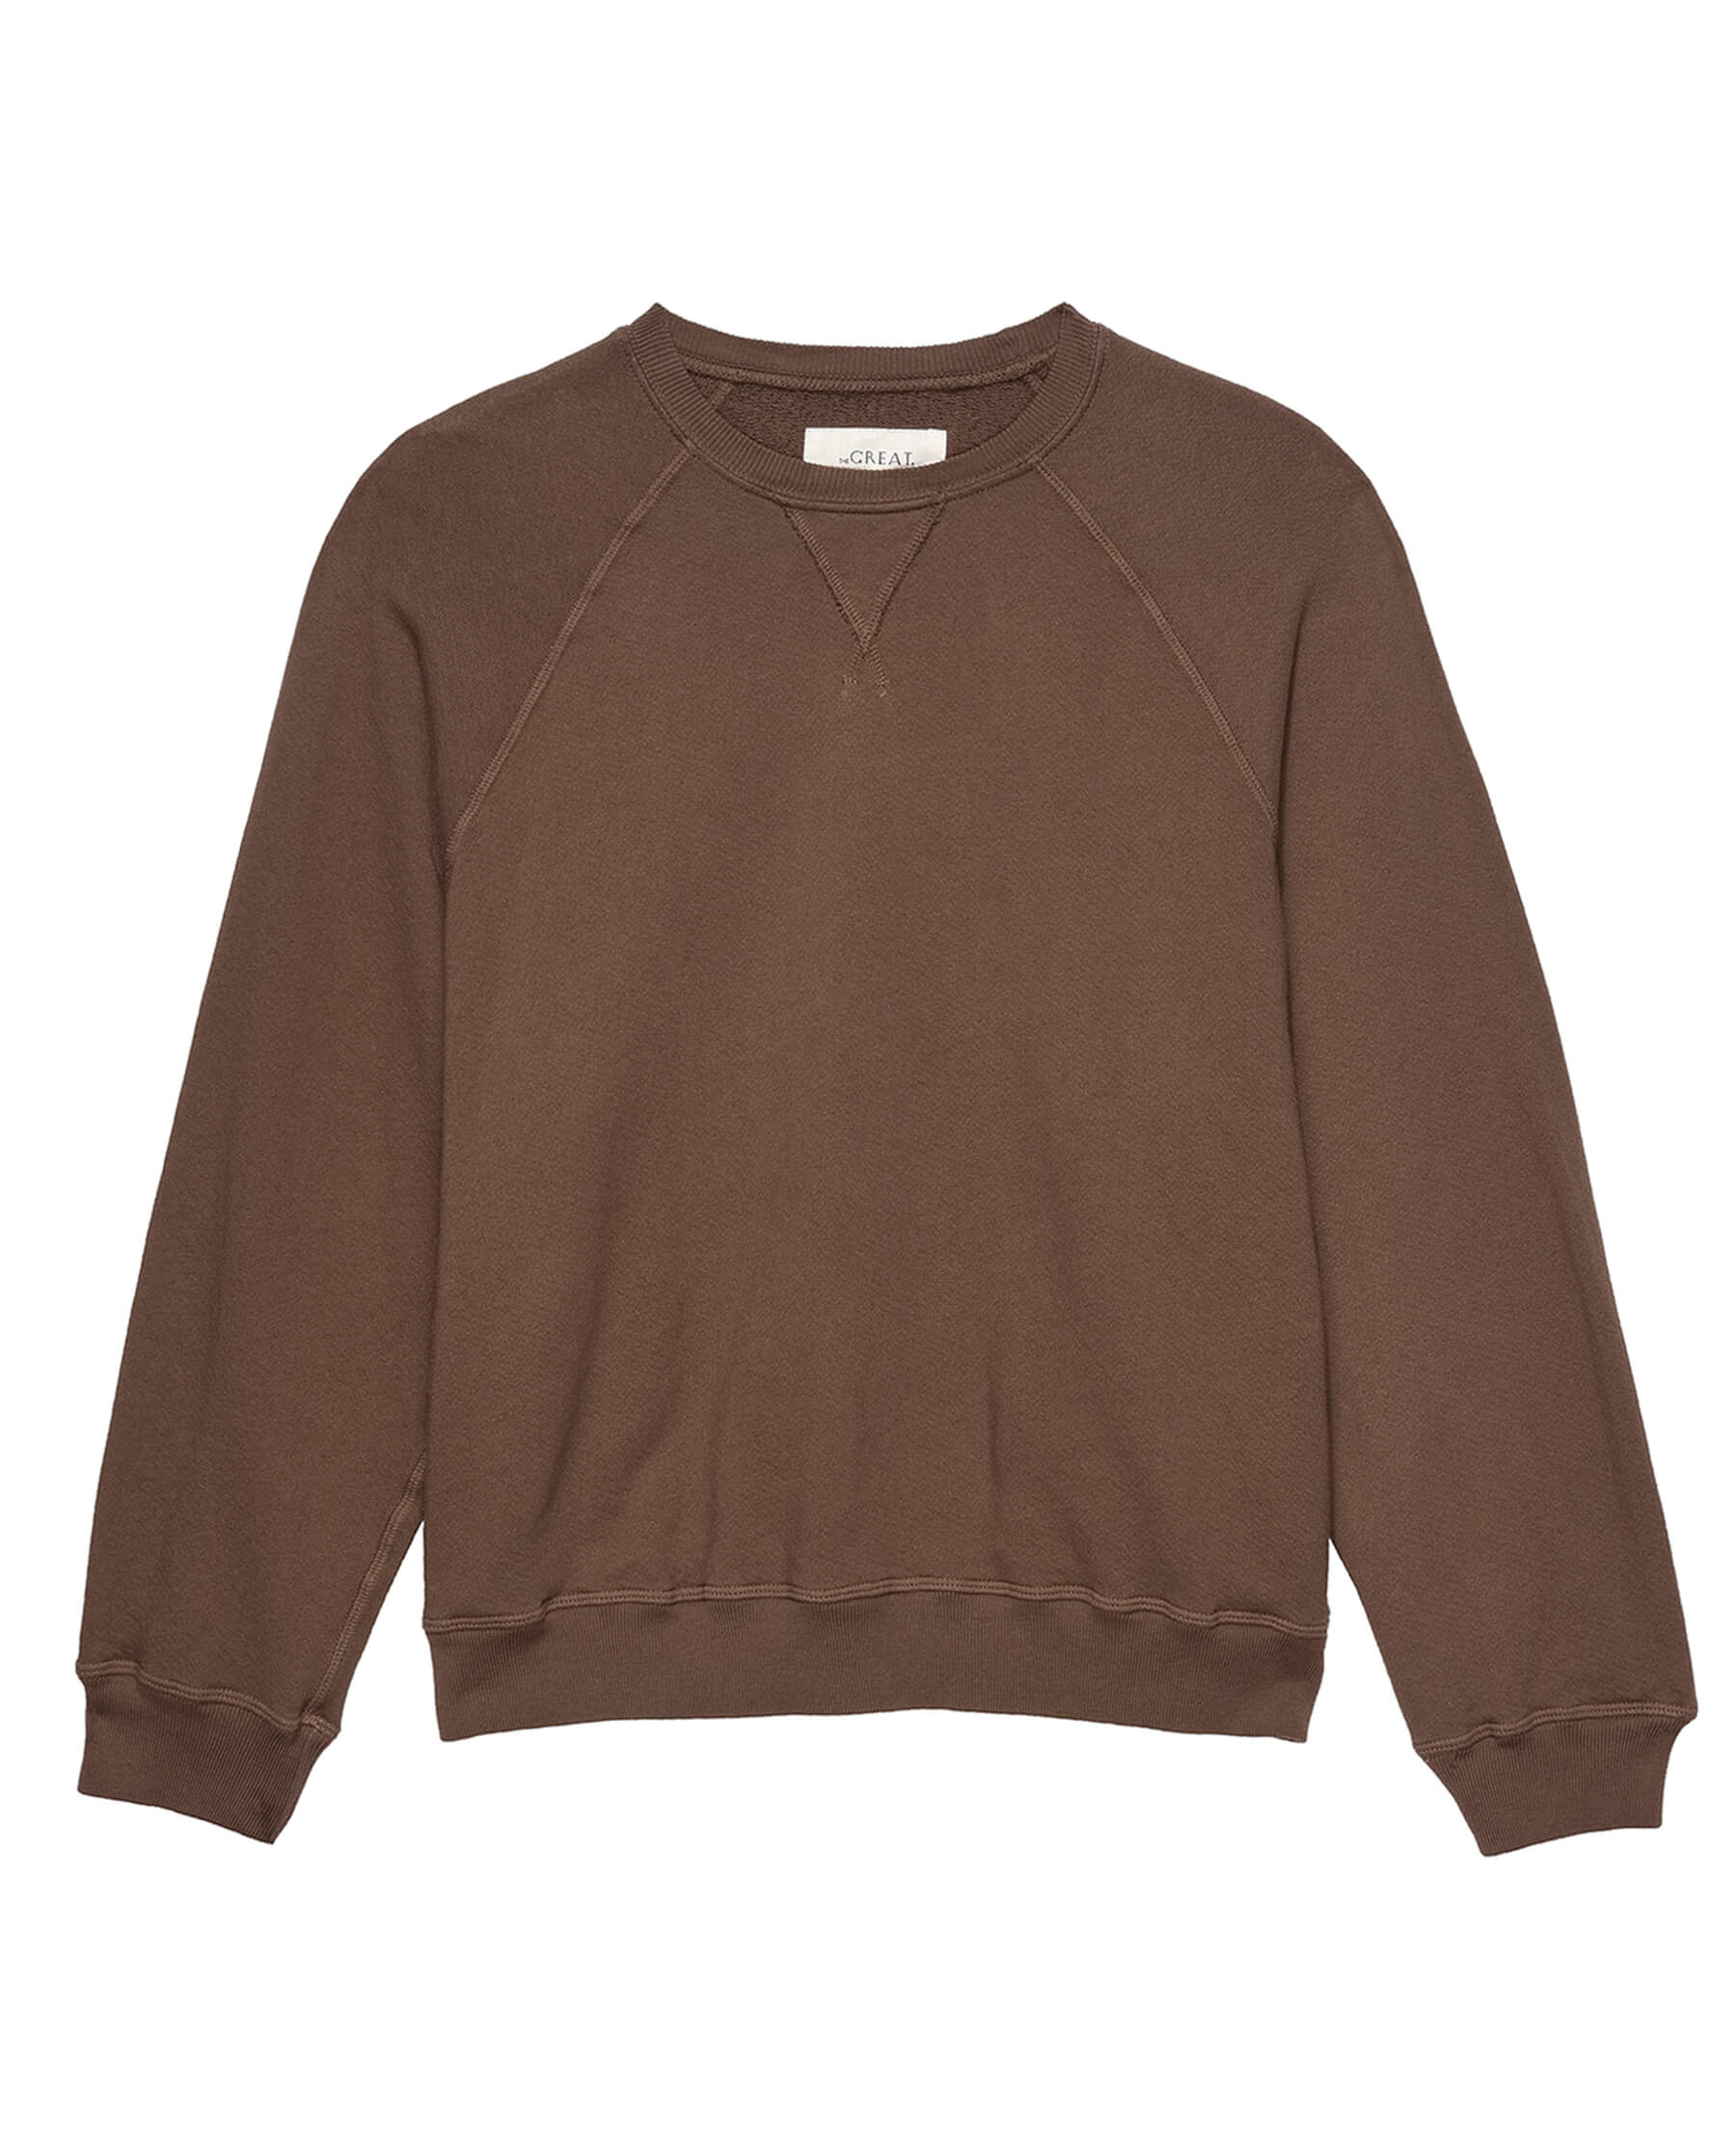 The Slouch Sweatshirt. Solid -- Hickory